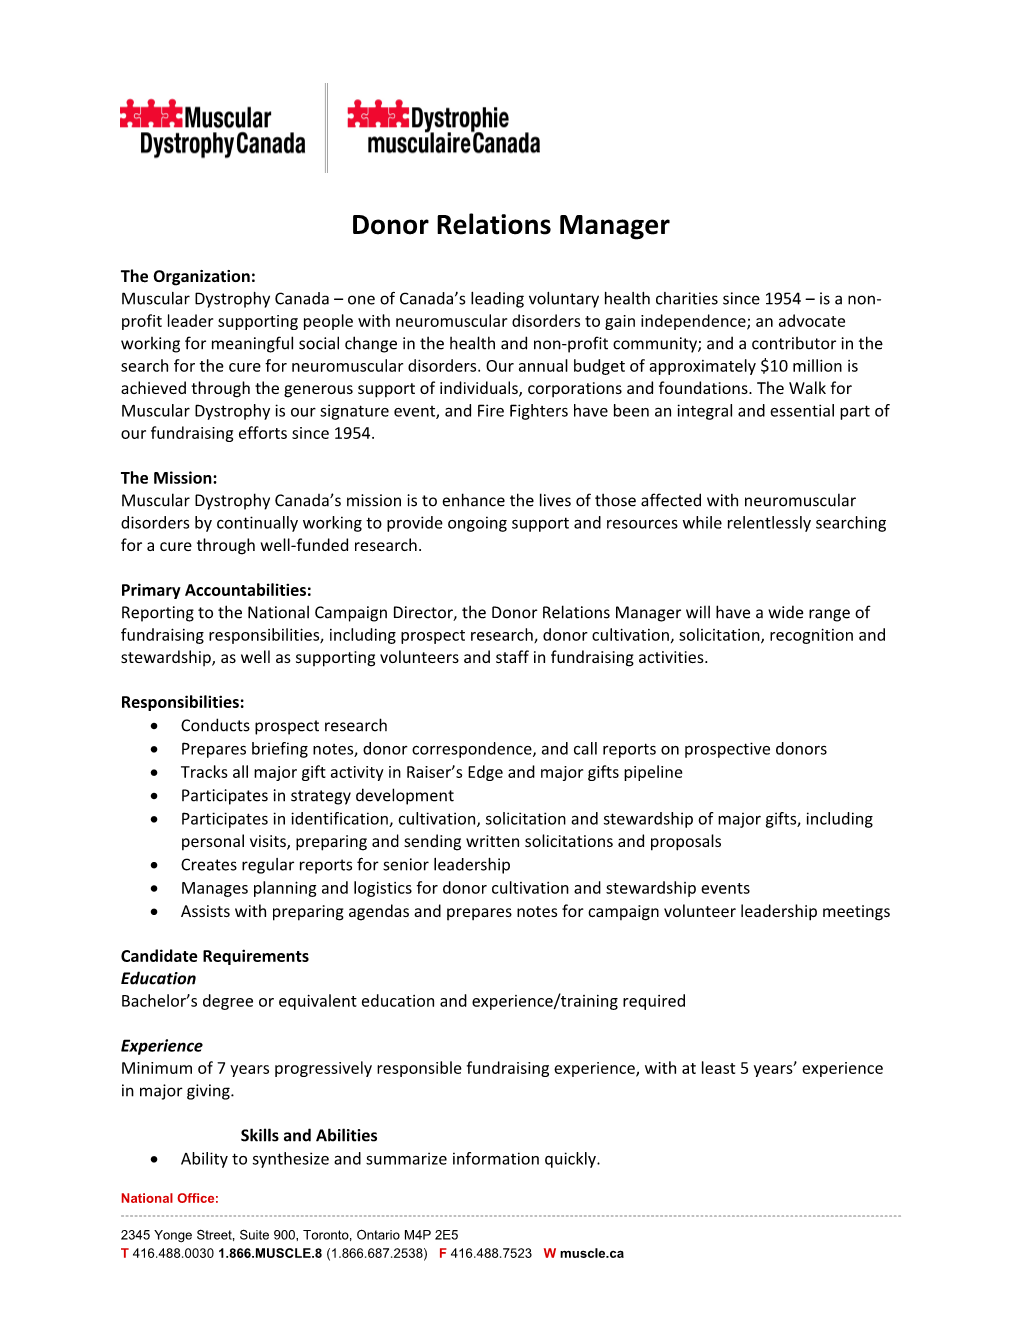 Donor Relations Manager